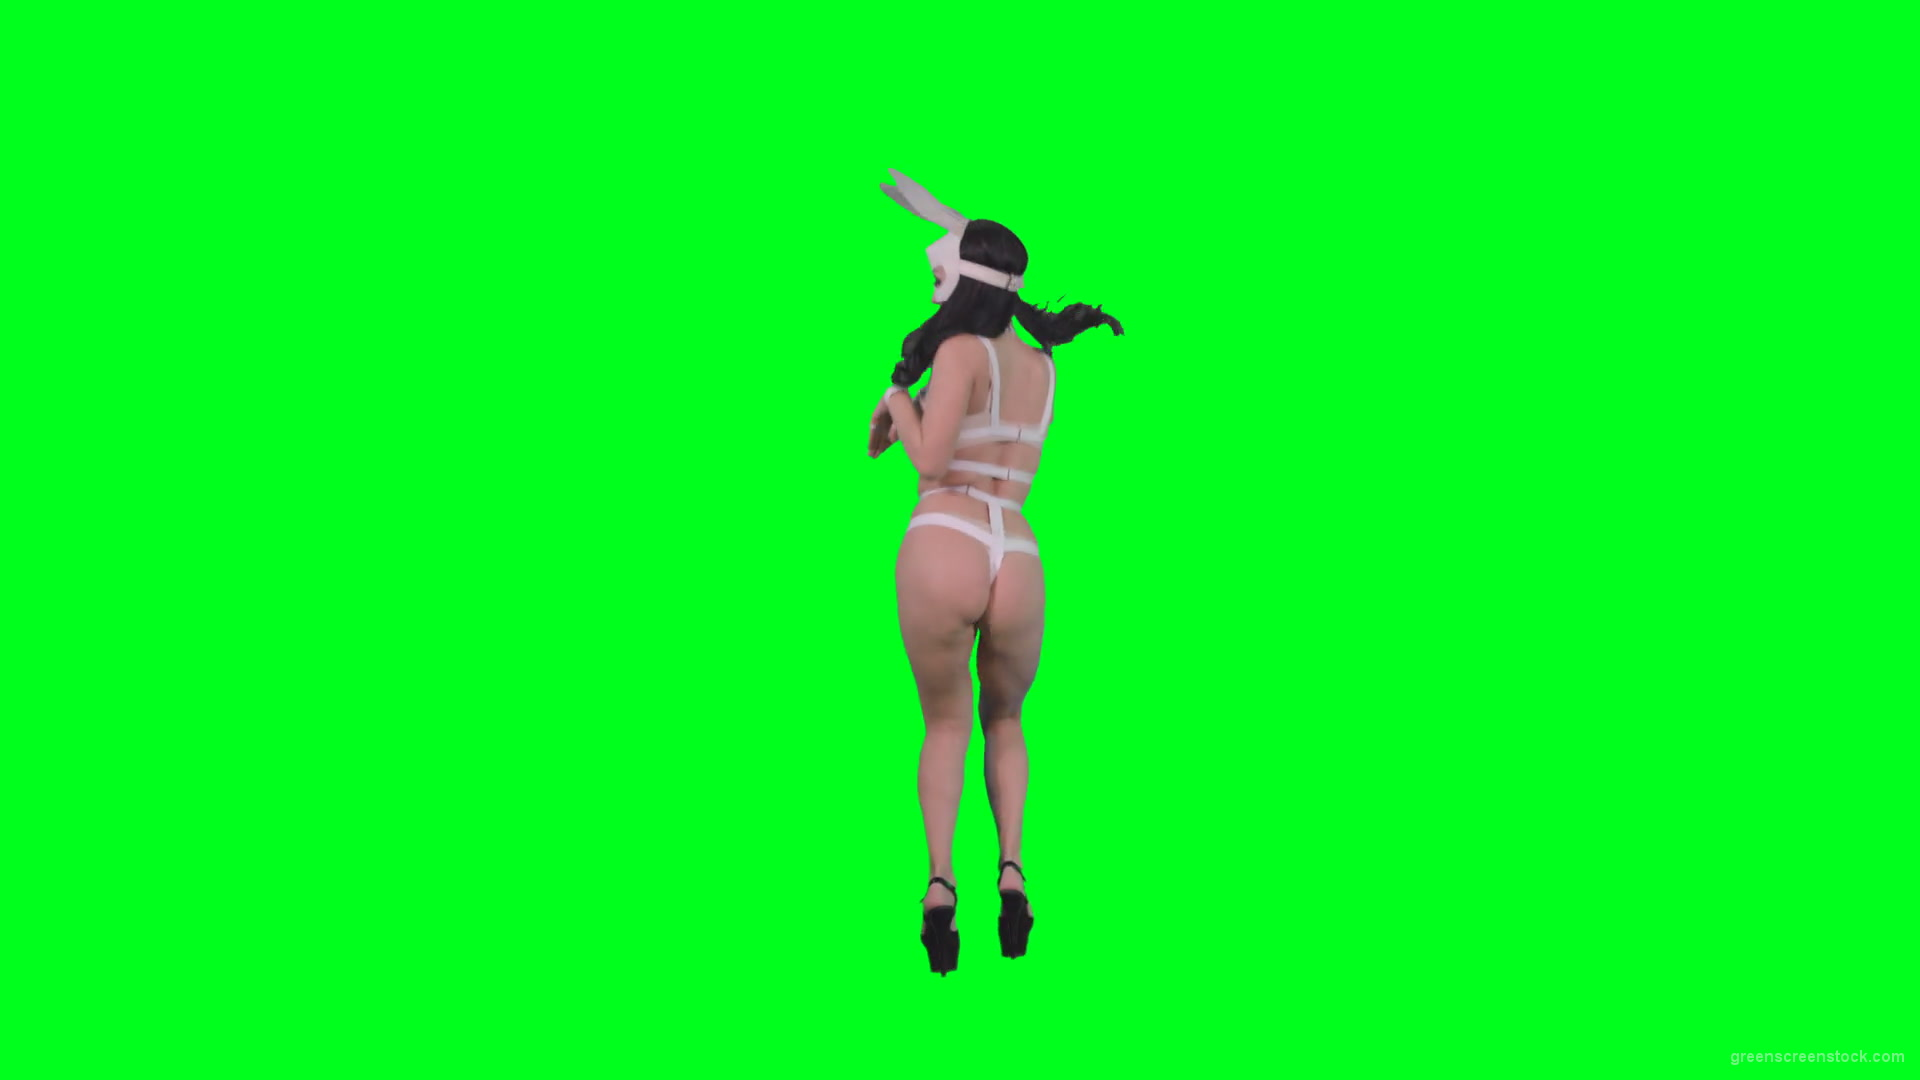 Young-girl-in-rabbit-costume-jumping-and-spinning-on-green-screen-4K-Video-Footage-1920_006 Green Screen Stock